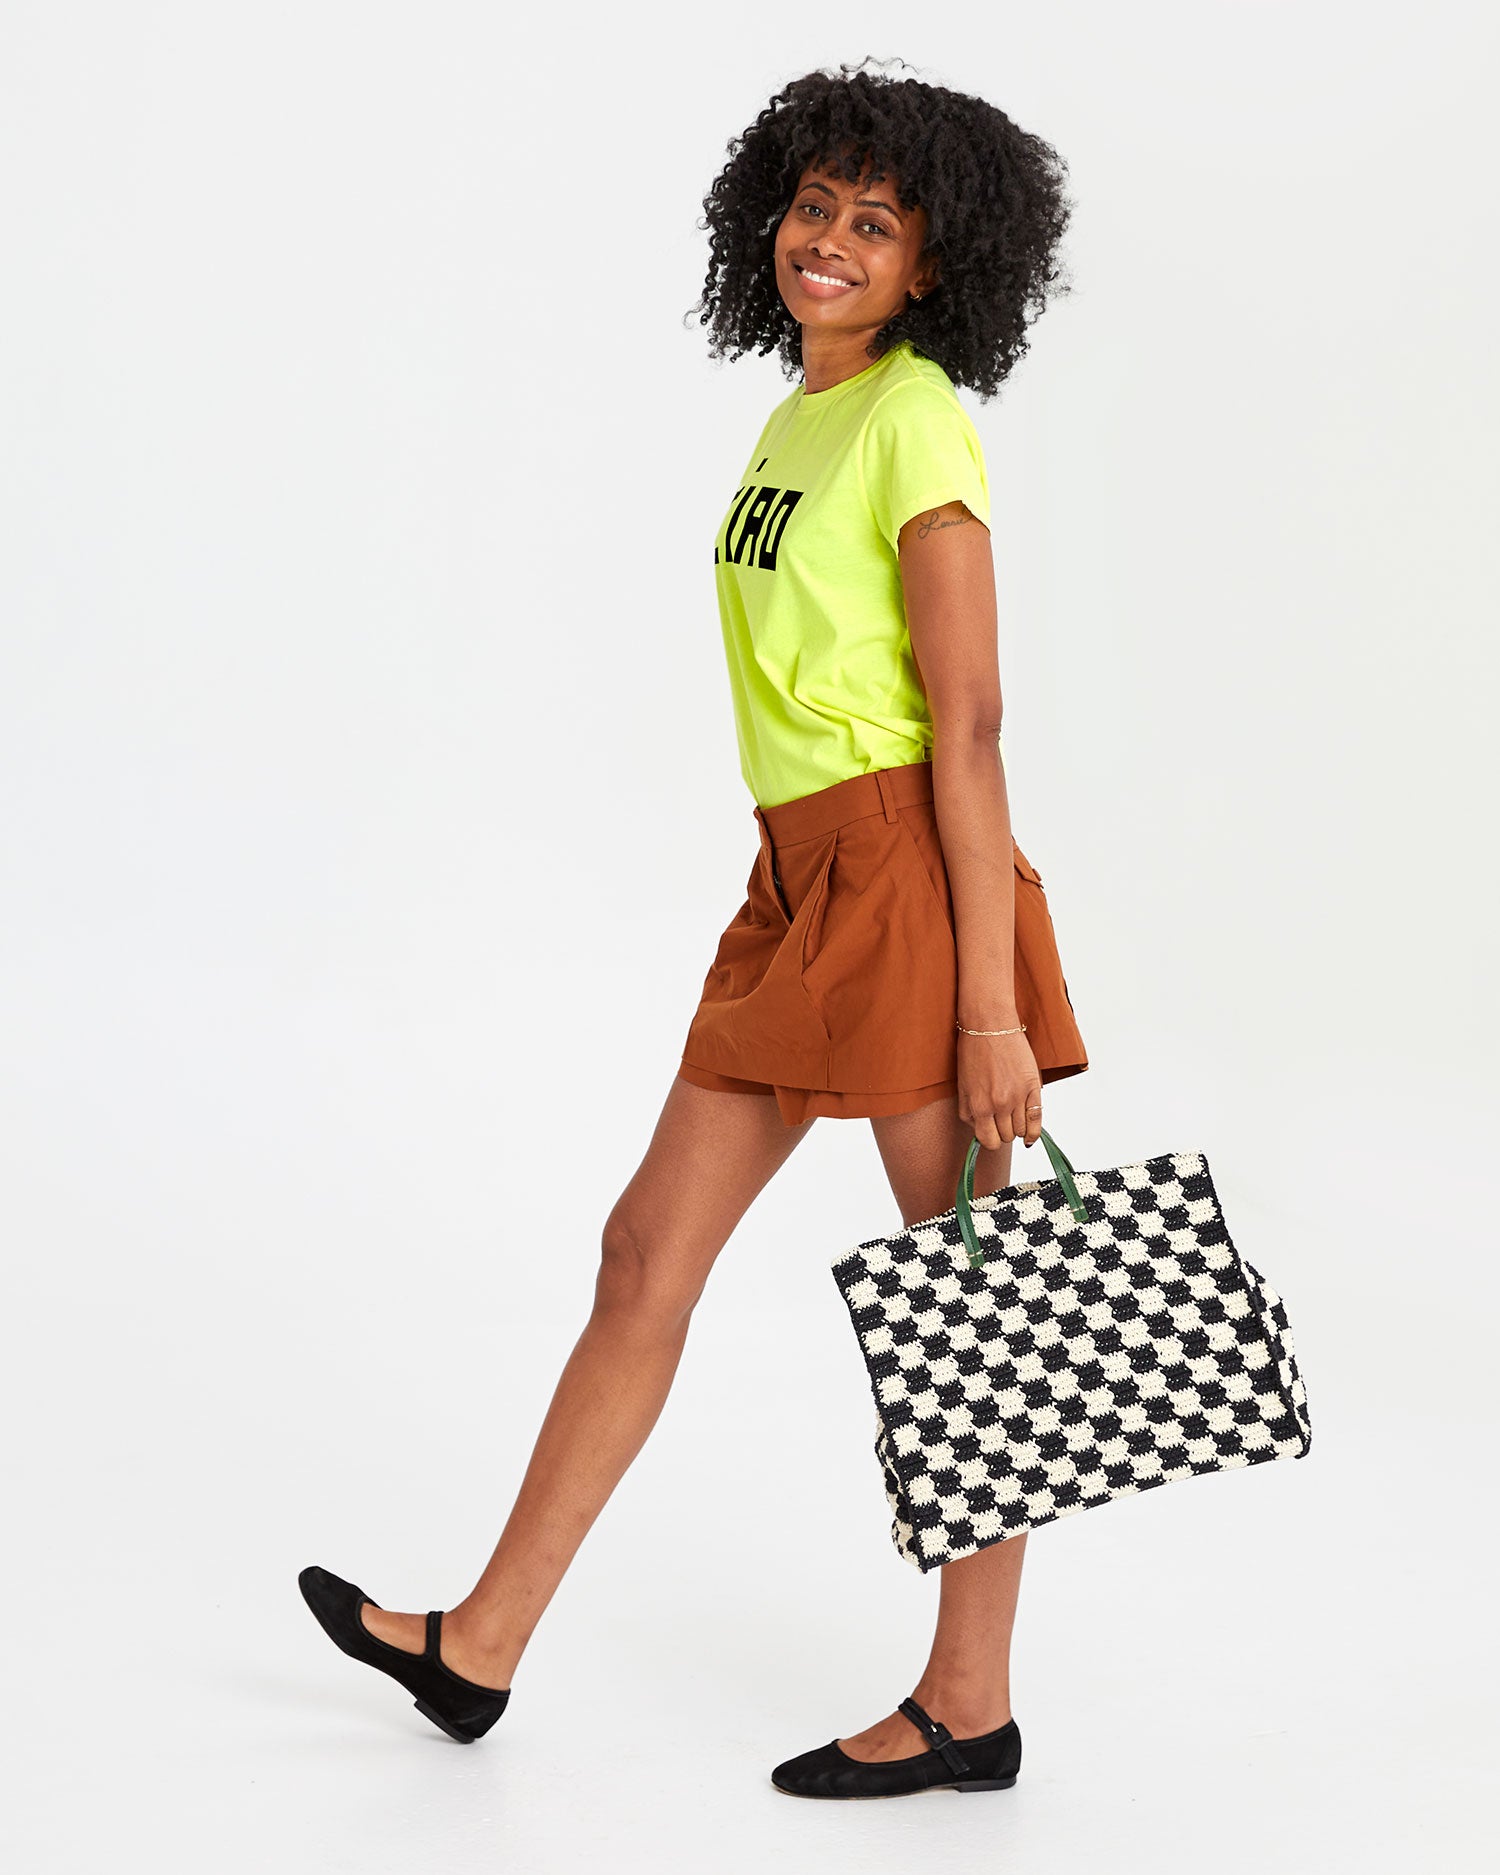 Mecca carrying the Black & Cream Crochet Checkers Summer Simple Tote